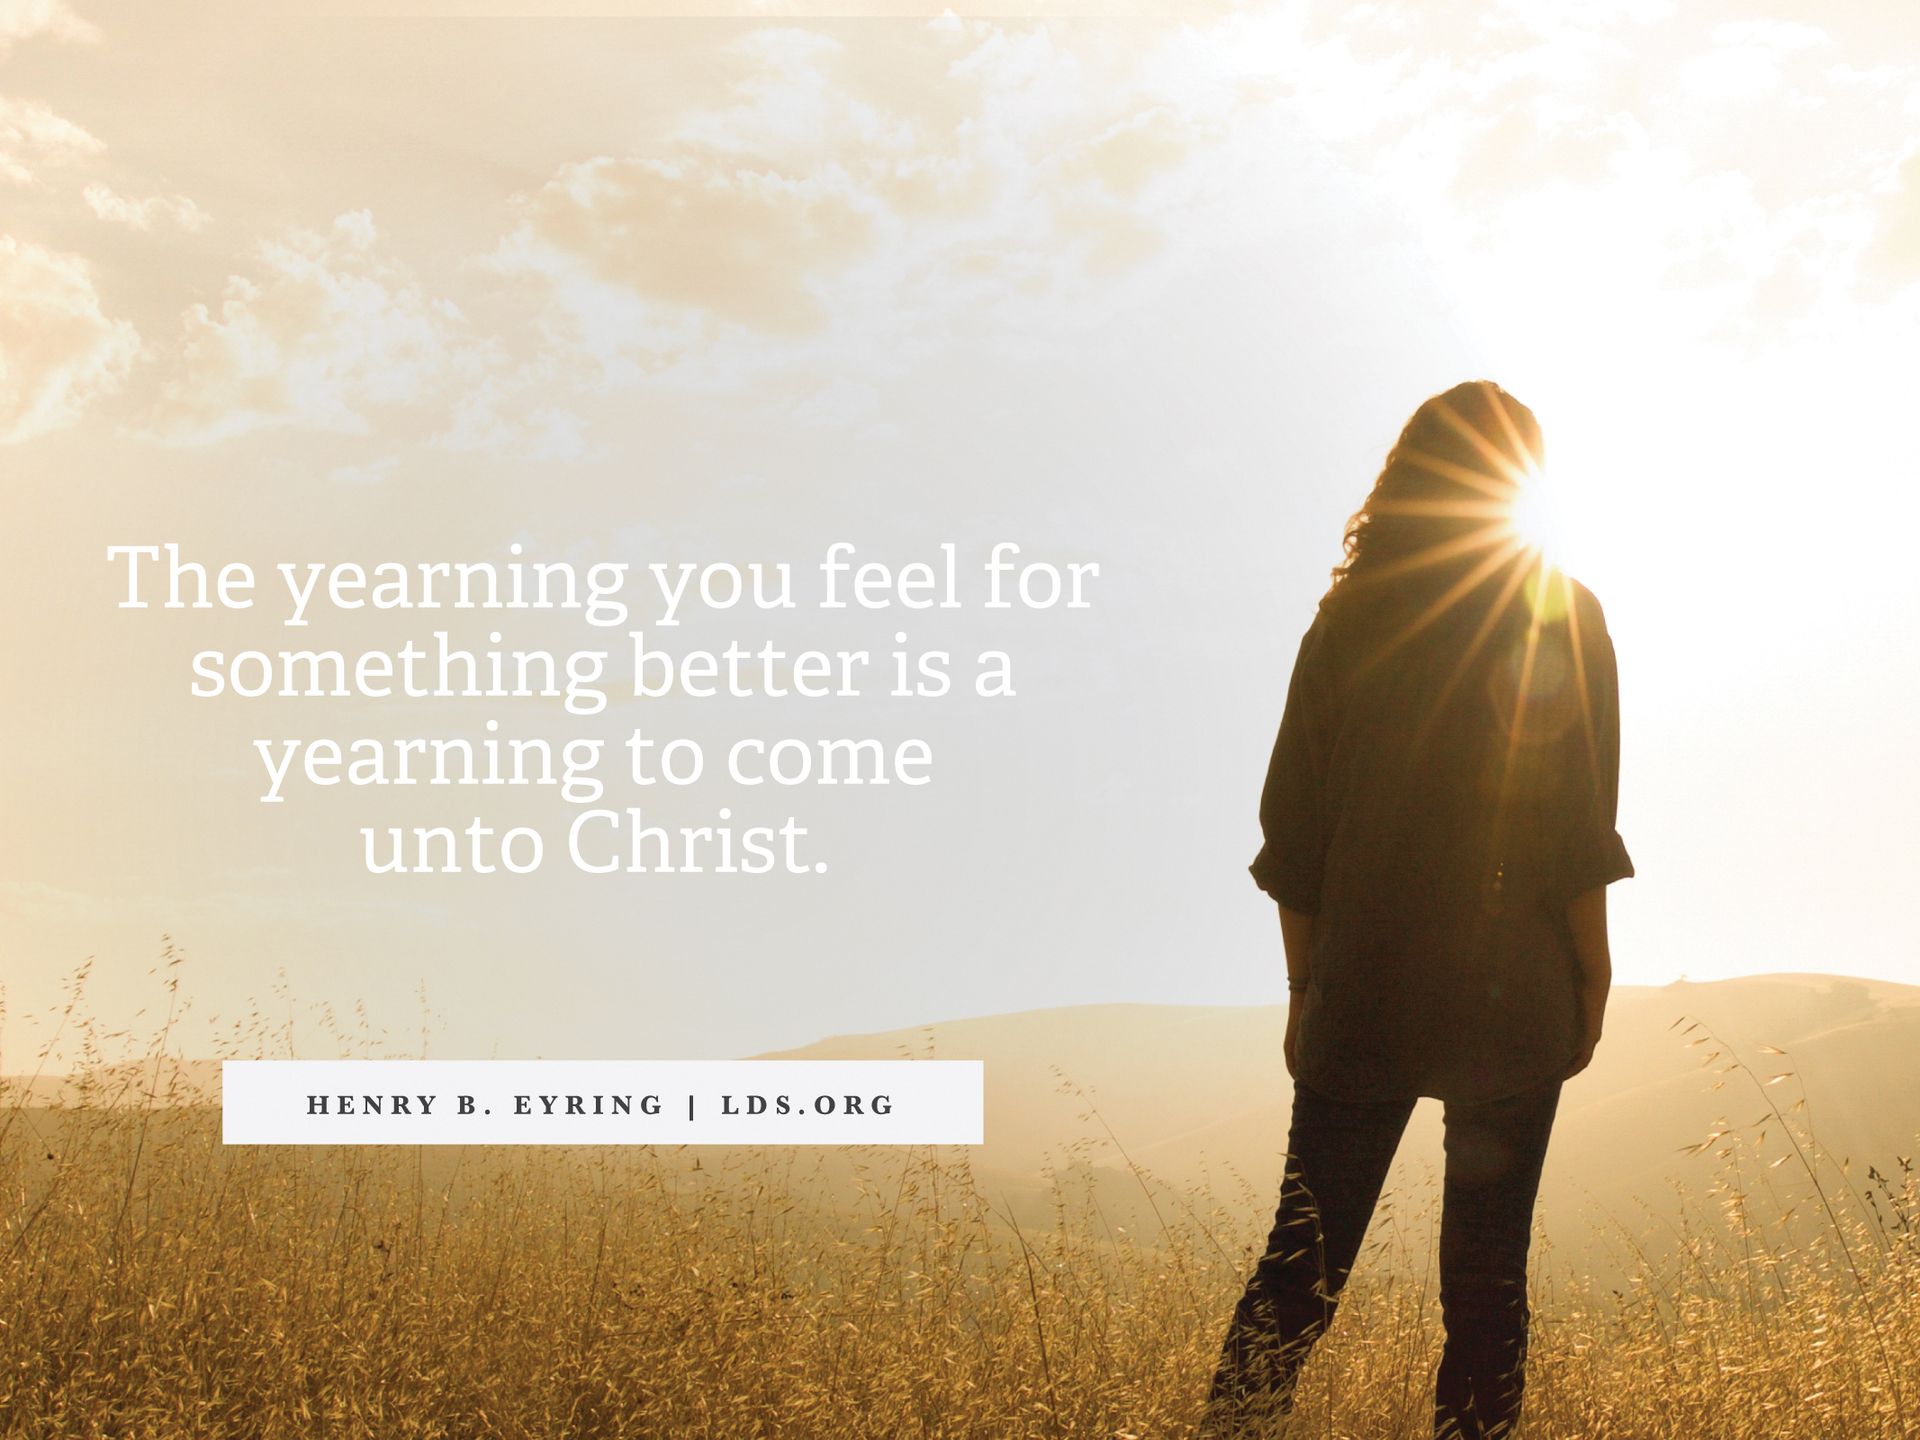 “The yearning you feel for something better is a yearning to come unto Christ.” —President Henry B. Eyring, “Come unto Christ”